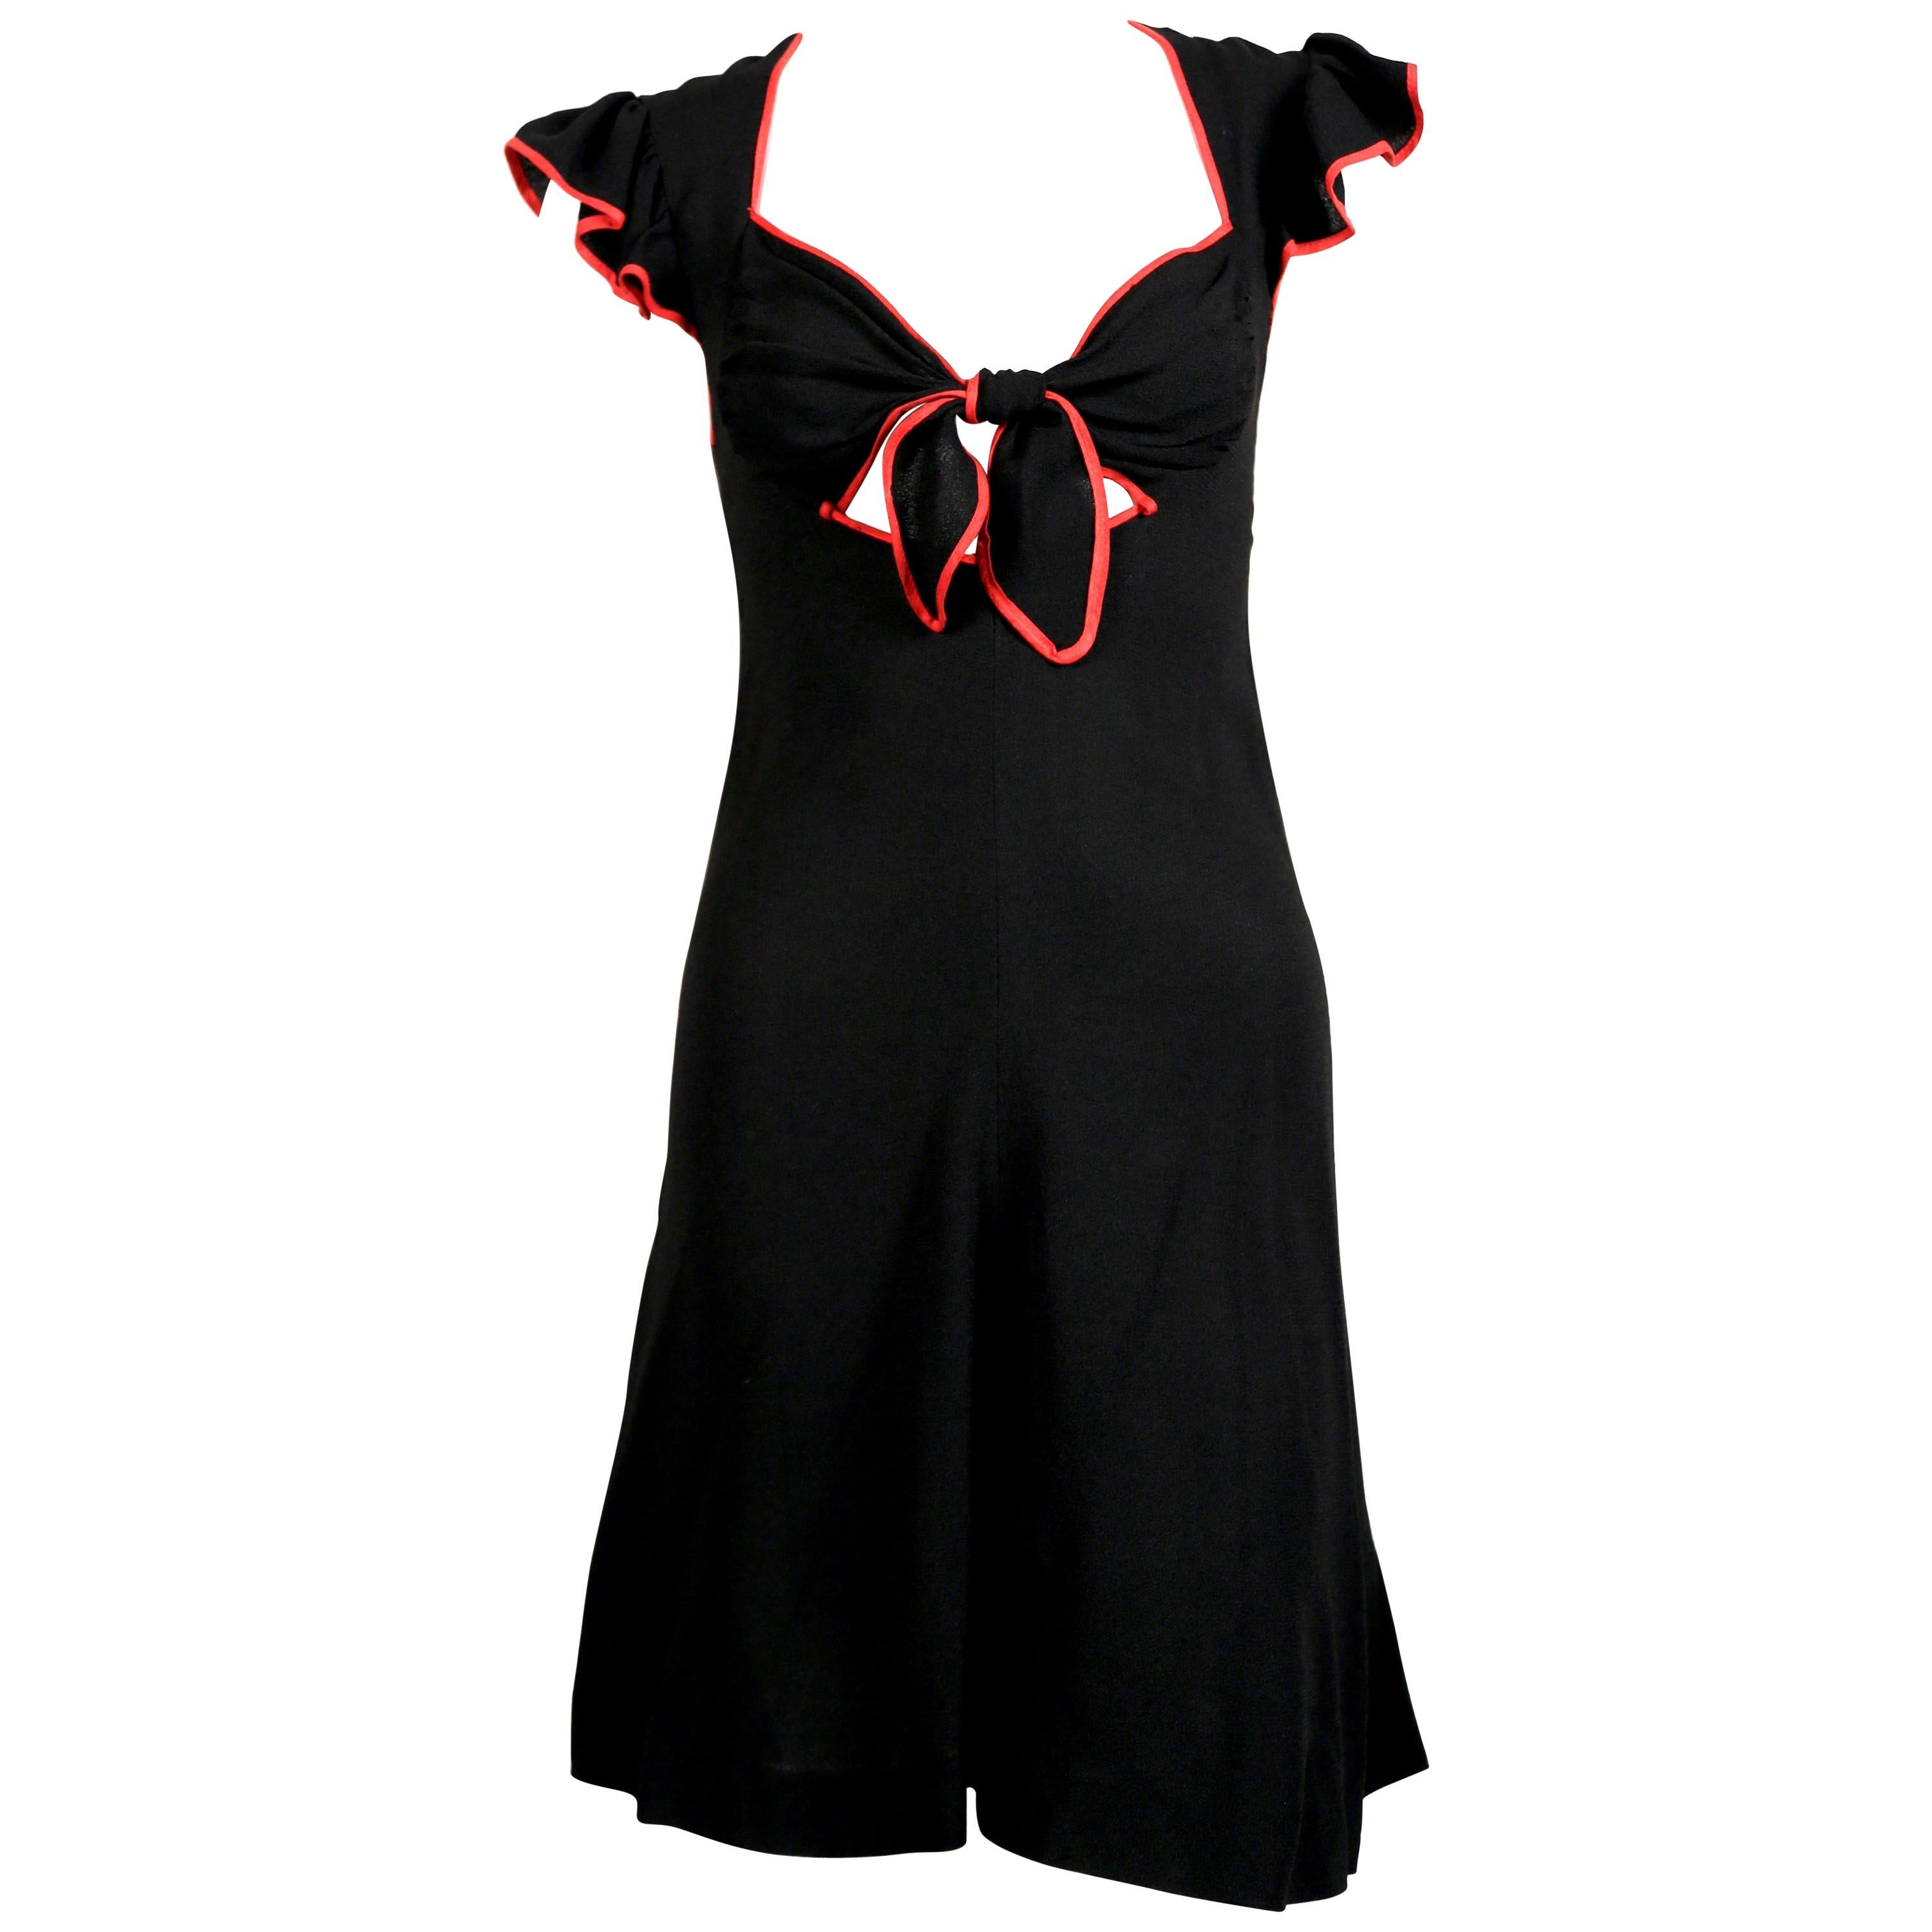 1970's OSSIE CLARK black moss crepe dress with red trim and cut out neckline